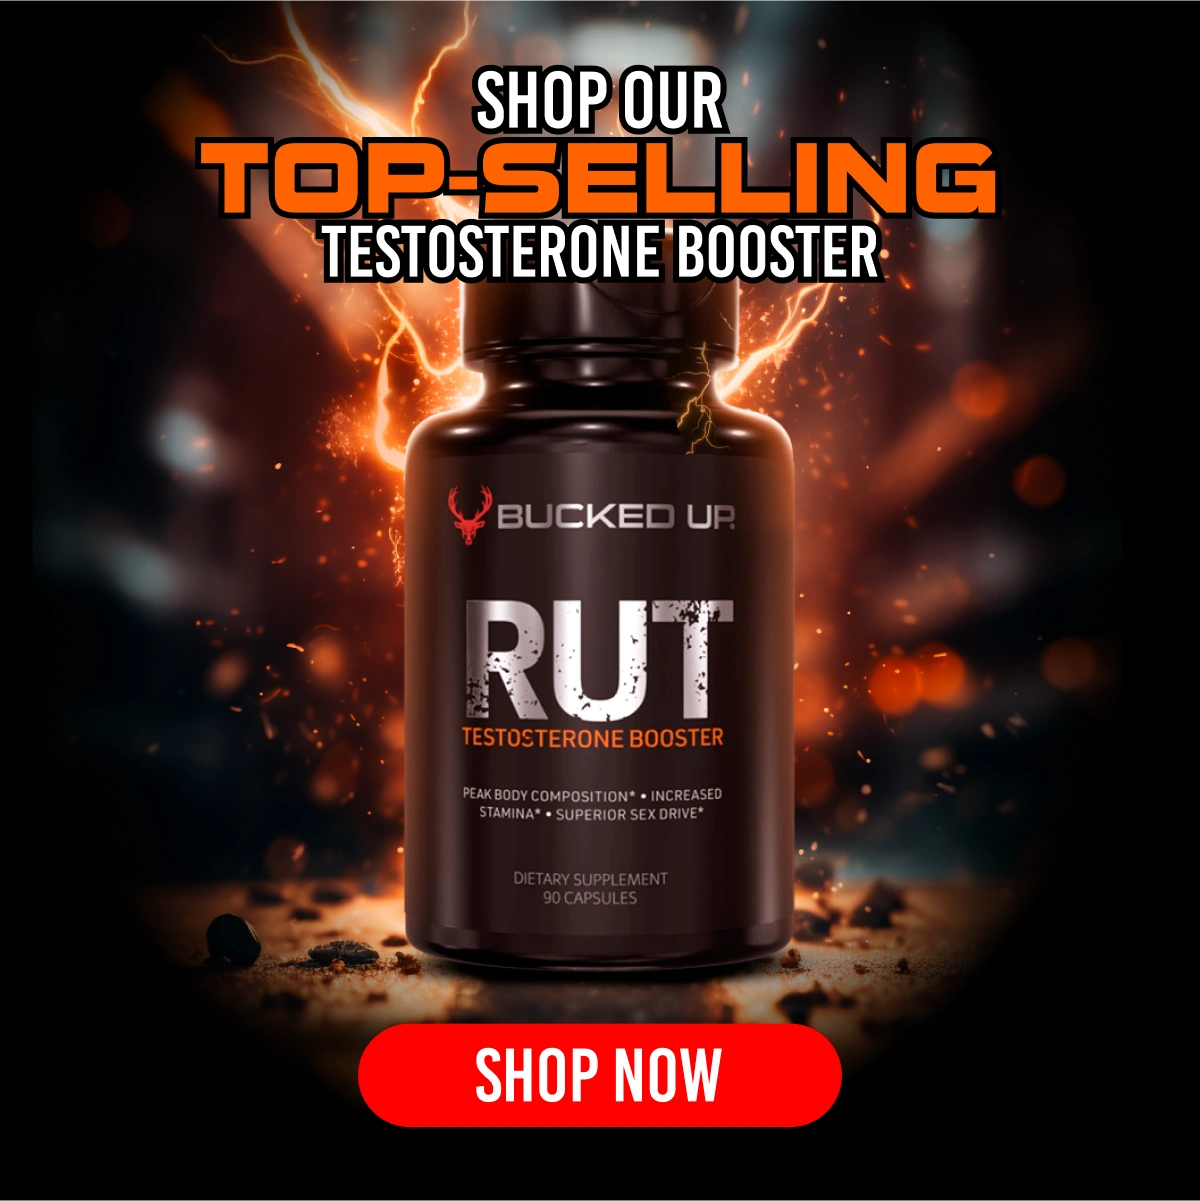 Rut - Text reads, shop our top-selling testosterone booster.  Button reads, shop now.  Image of the Rut Testosterone Booster Product.